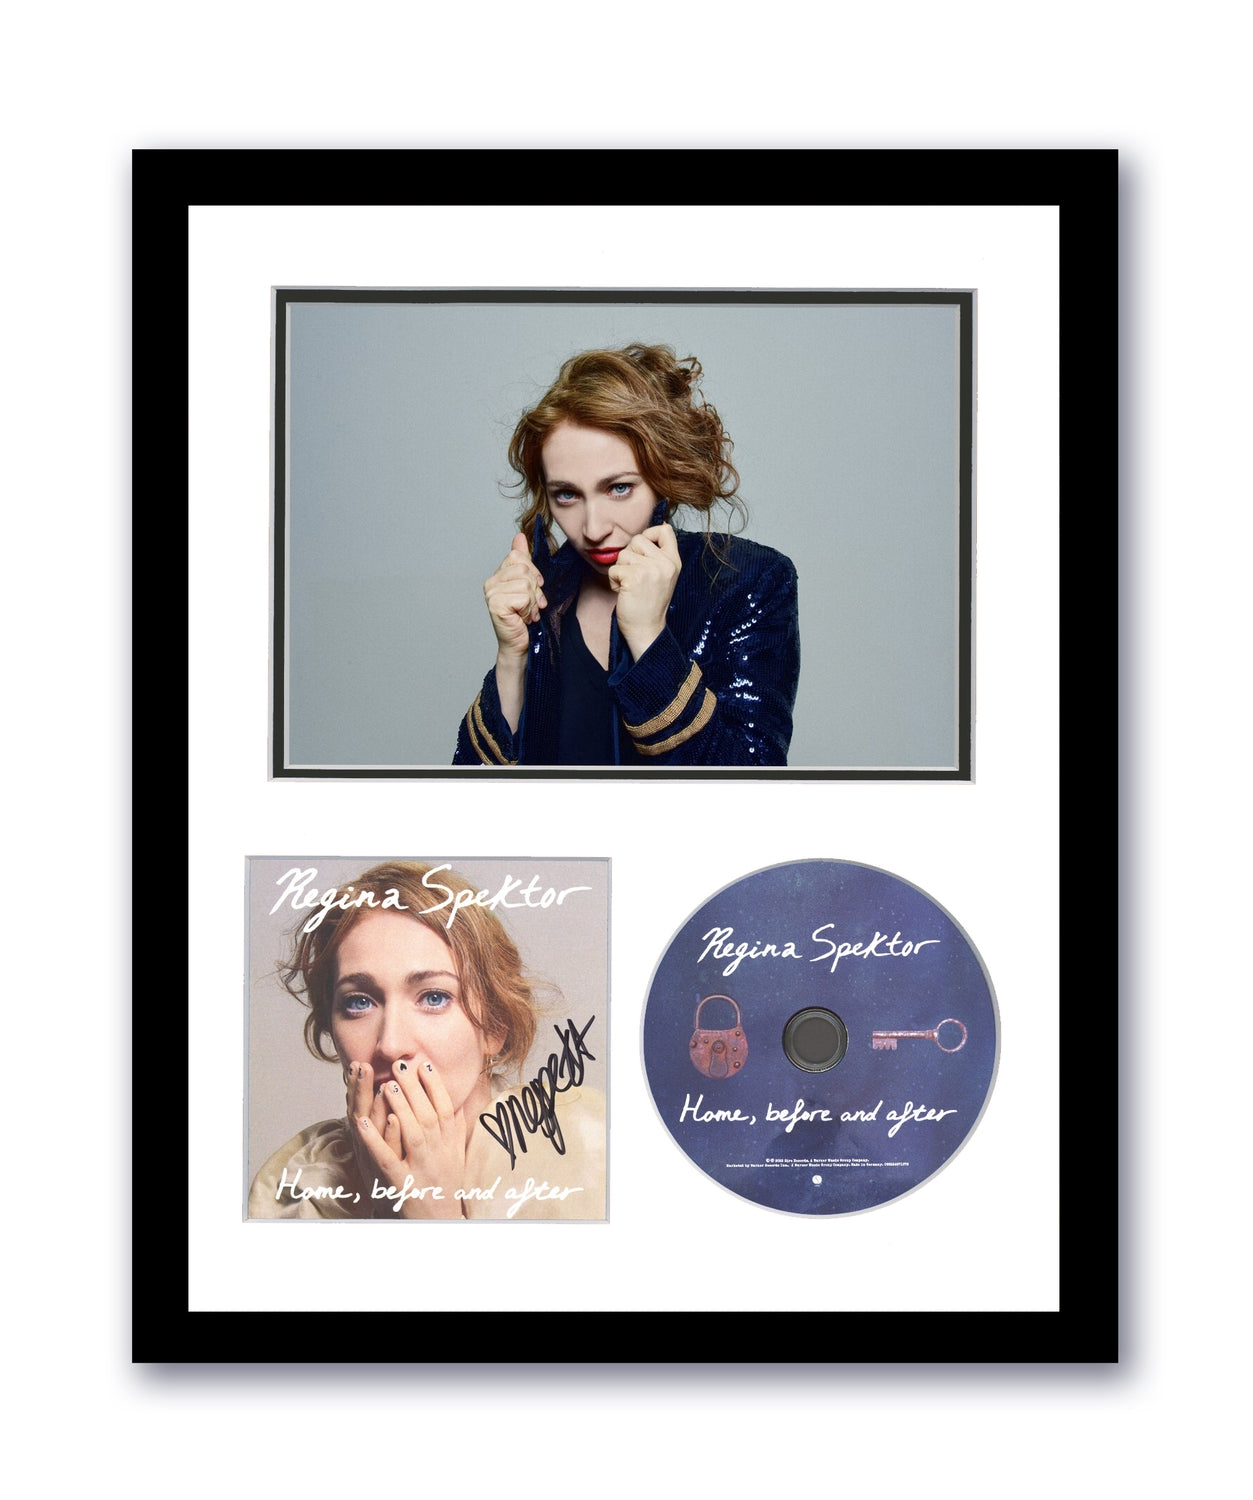 Regina Spektor Signed 11x14 Framed CD Home, before and after Autographed ACOA 5